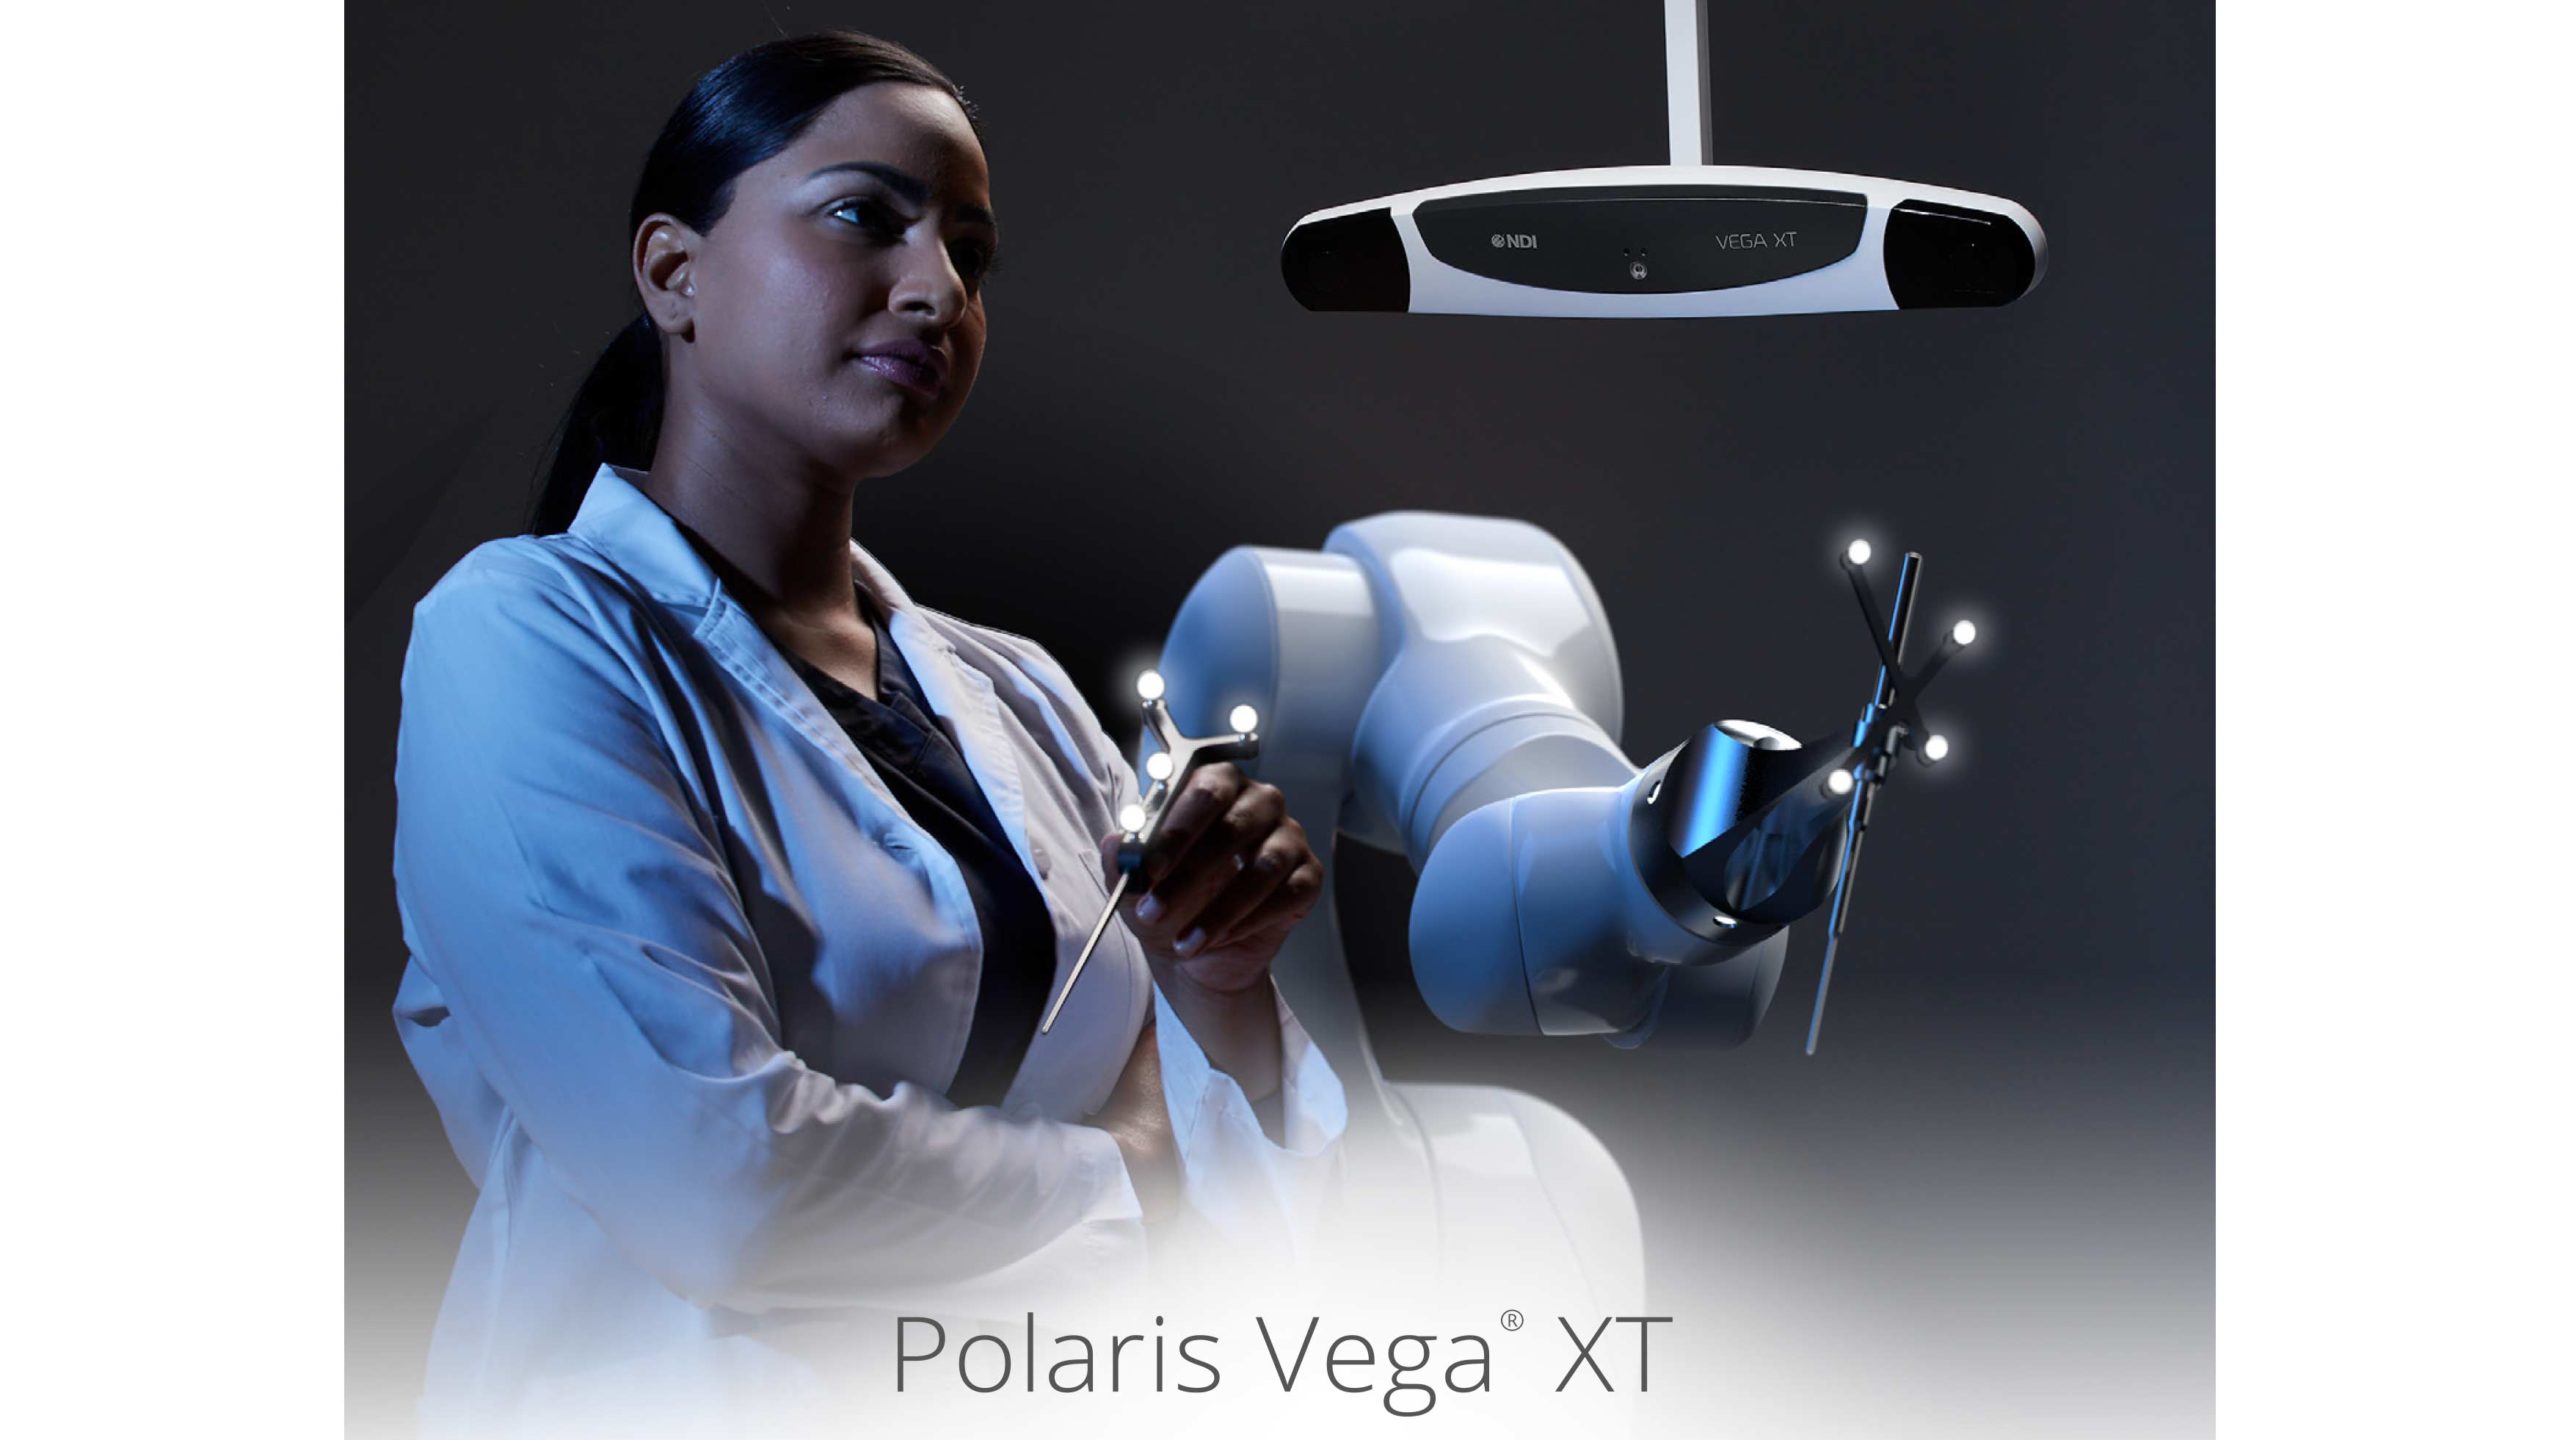 A woman has rigid body with spheres in her hand, in the background a robot and the camera